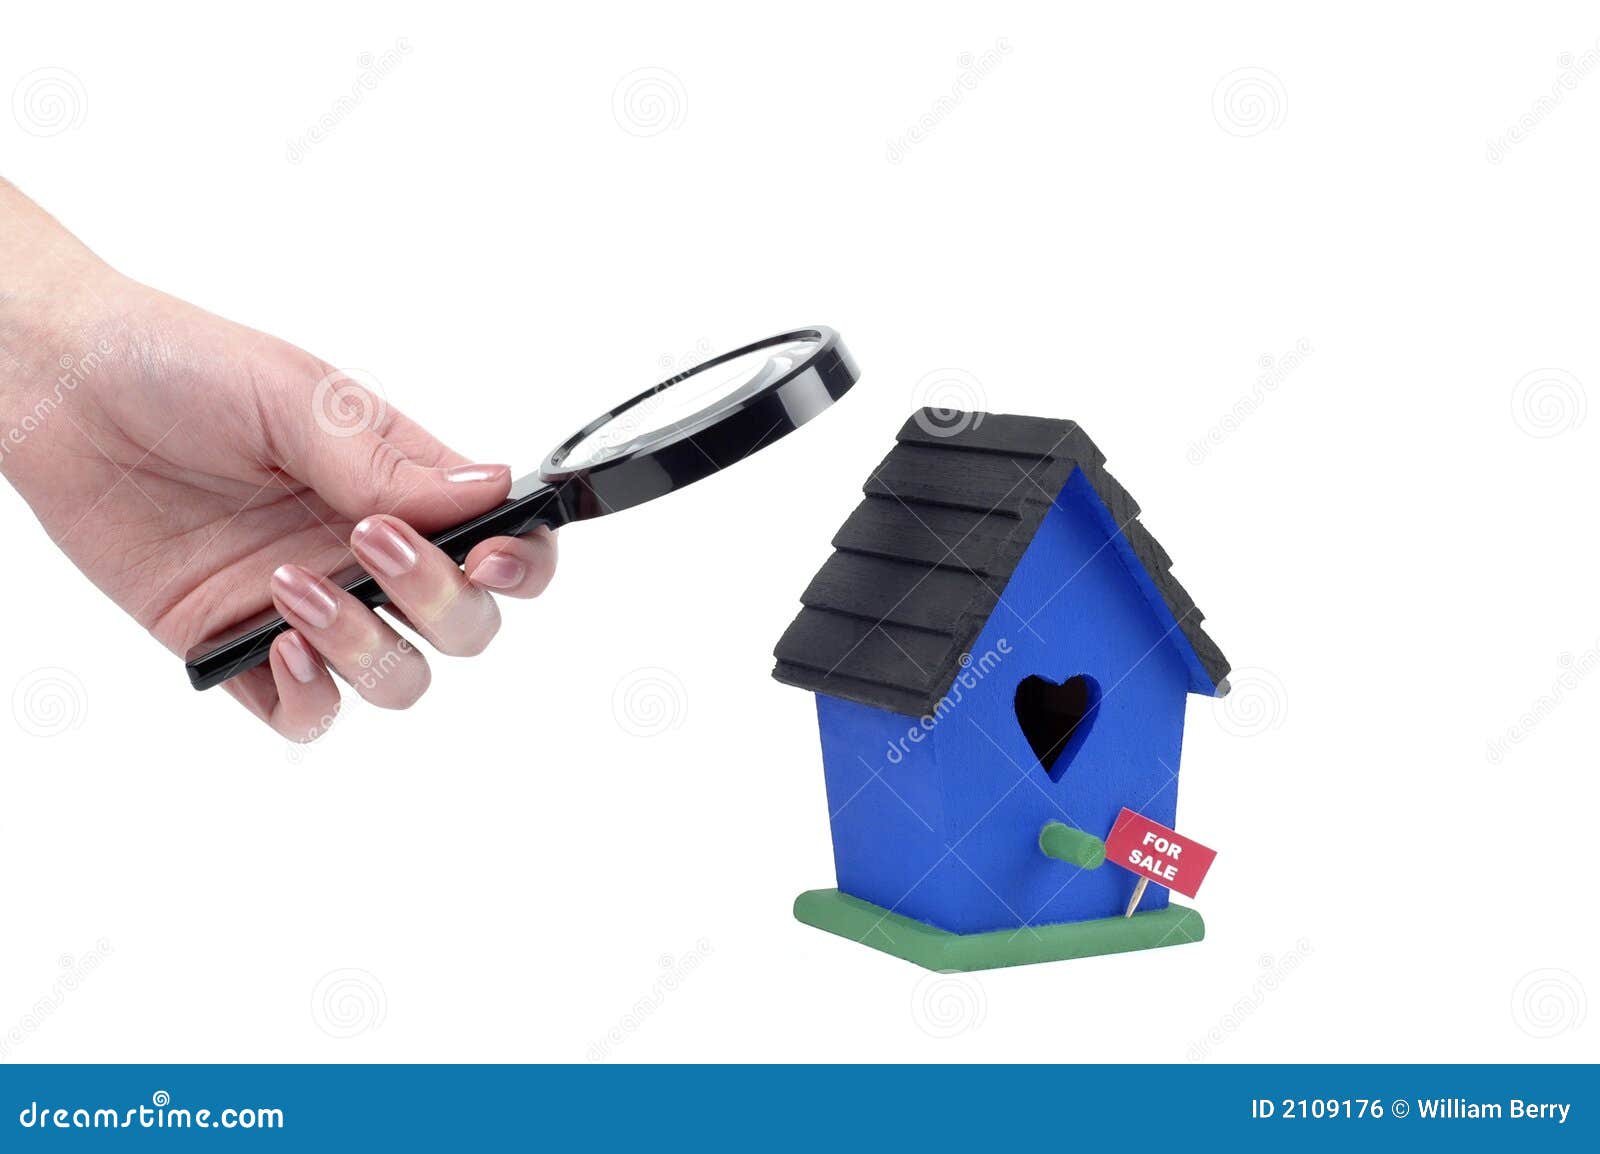 home inspection clipart - photo #43